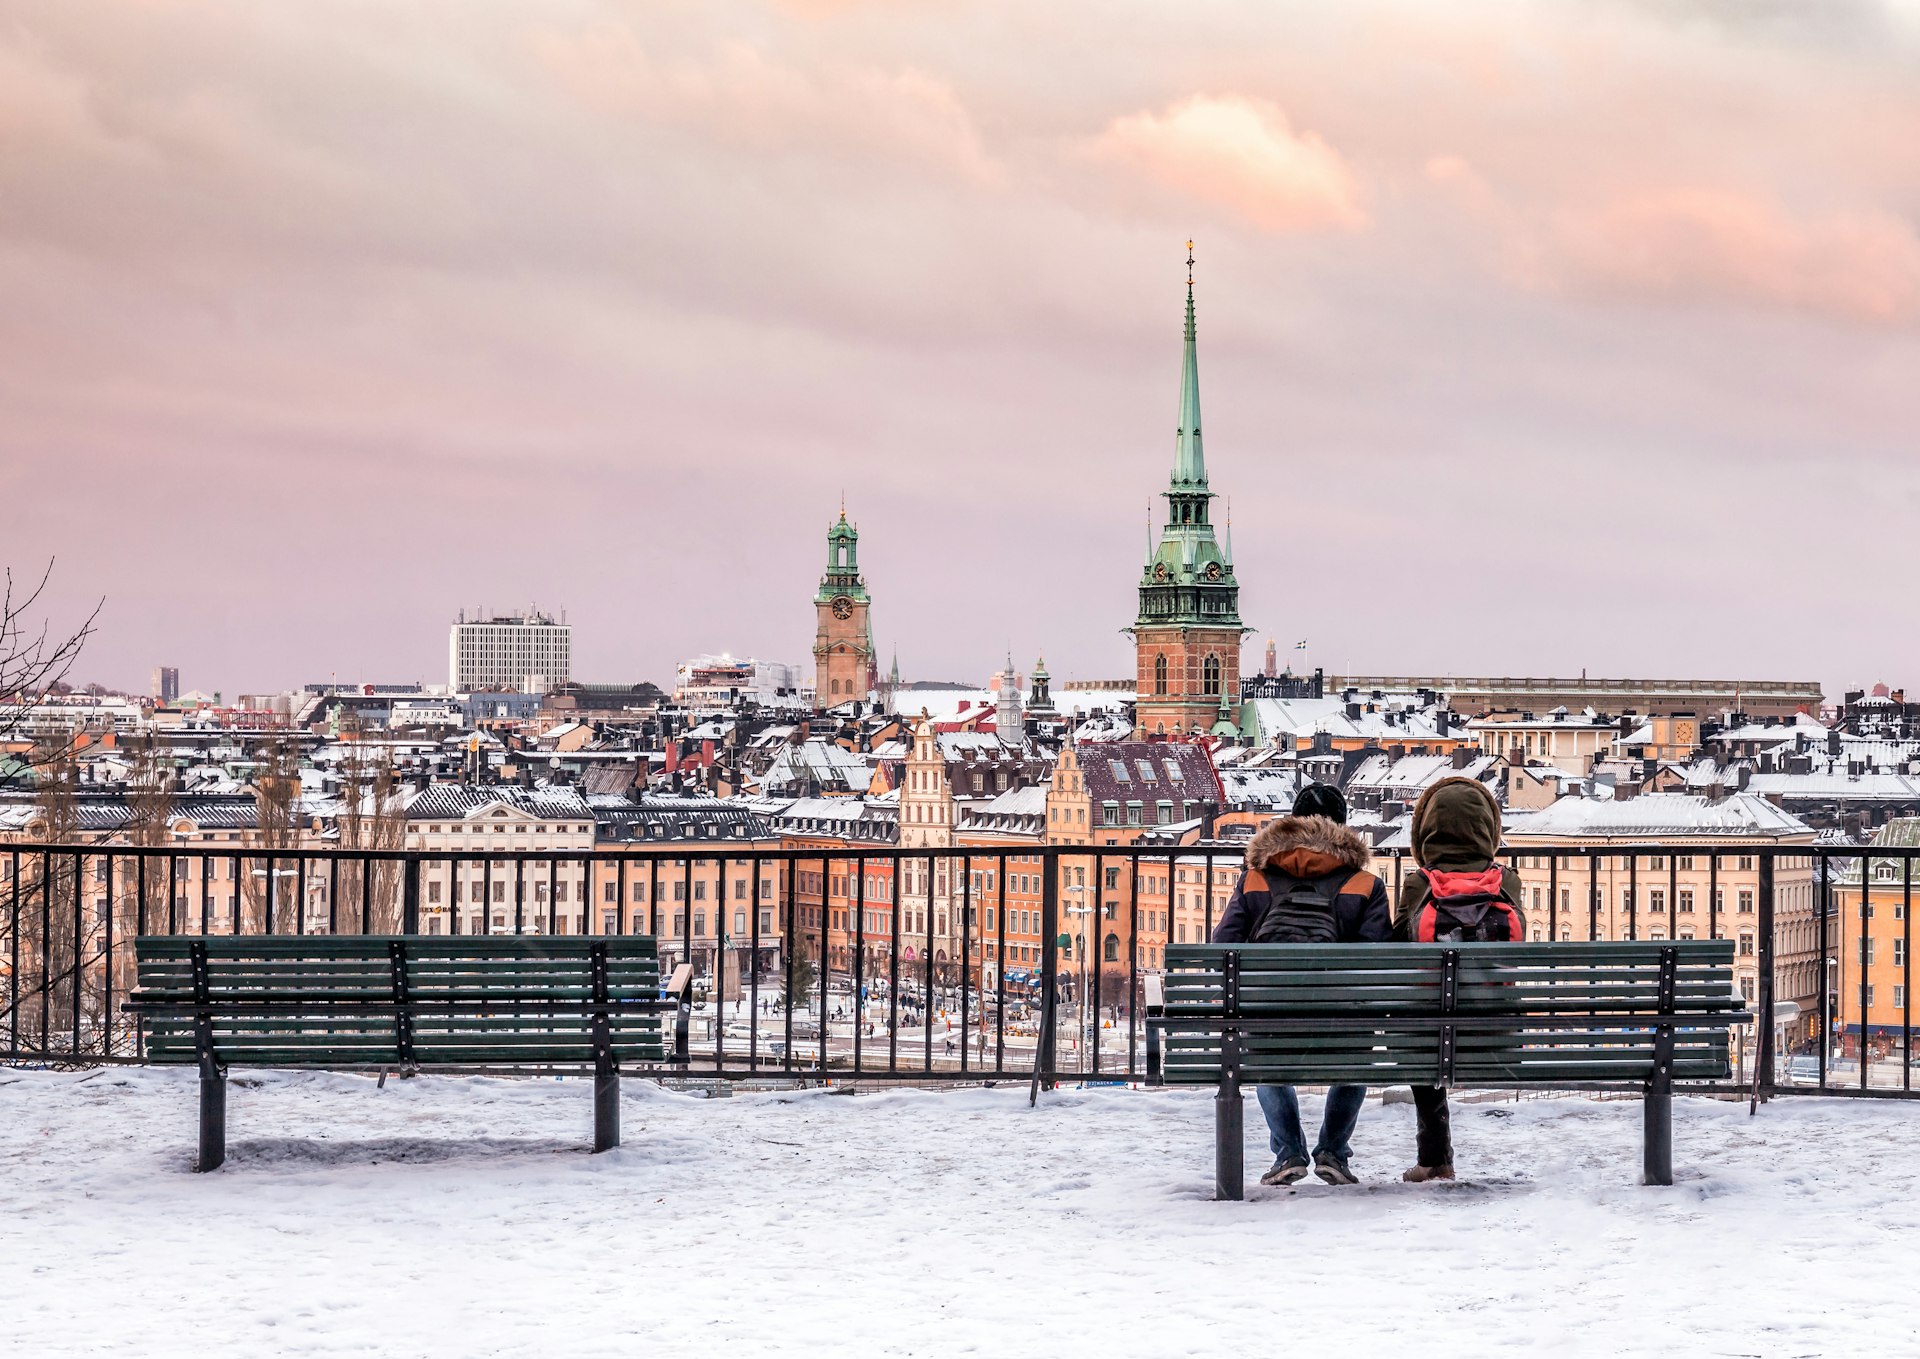 A couple sit at a bench with their backs to the camera looking towards the snow-covered roofs and spires of an Old Town city center